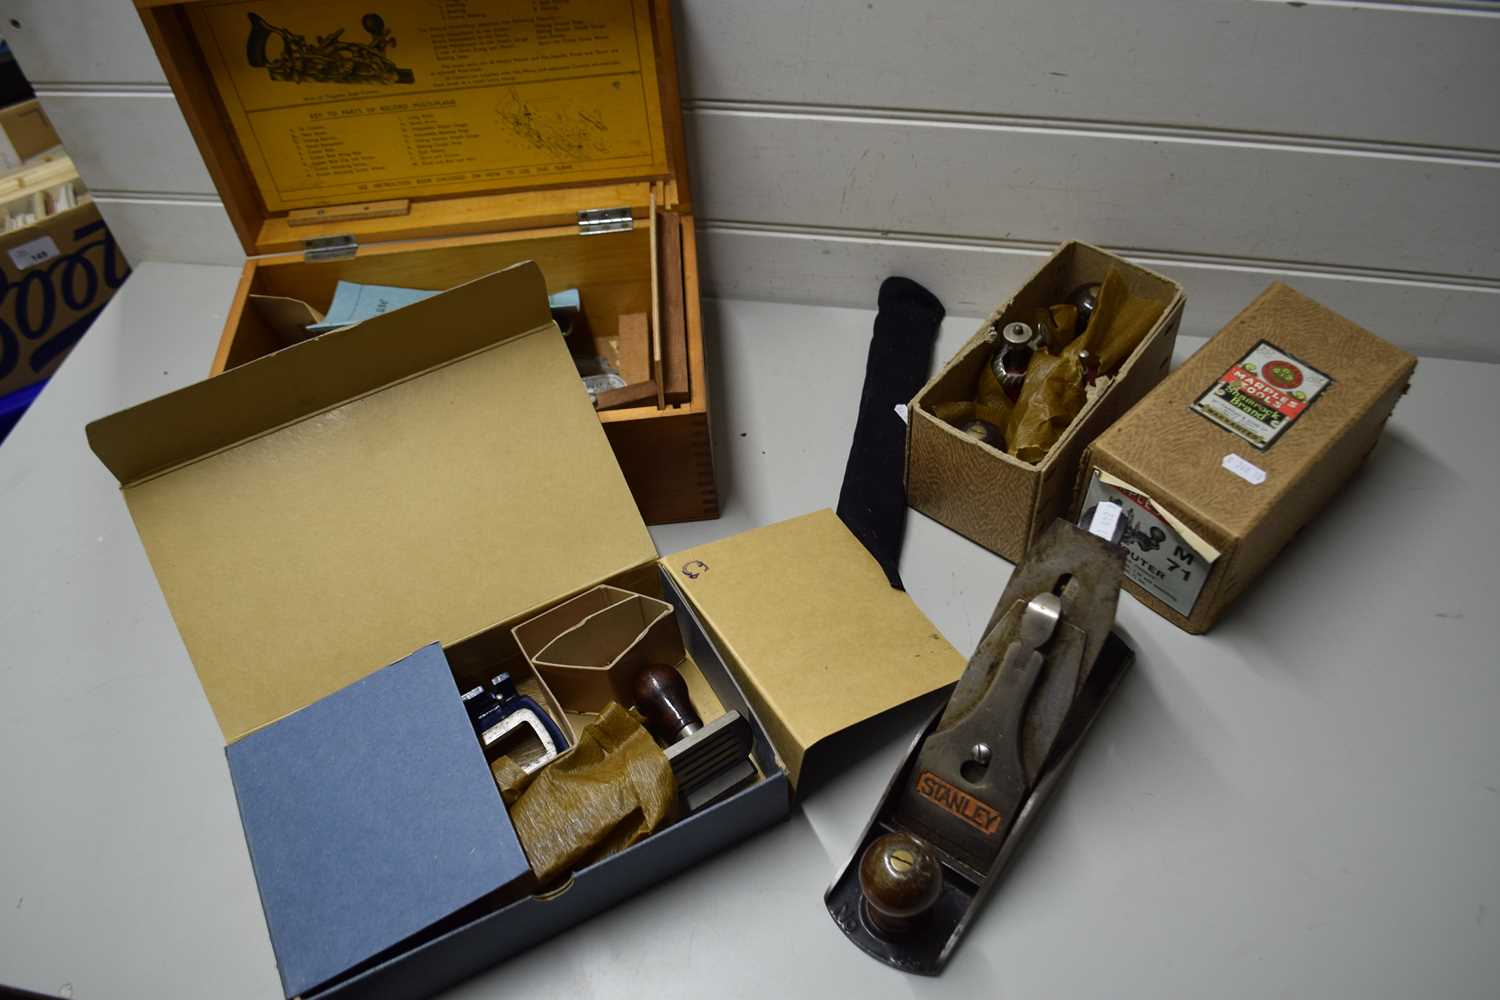 BOXED MULTI PLANE TOOL AND OTHER PLANES